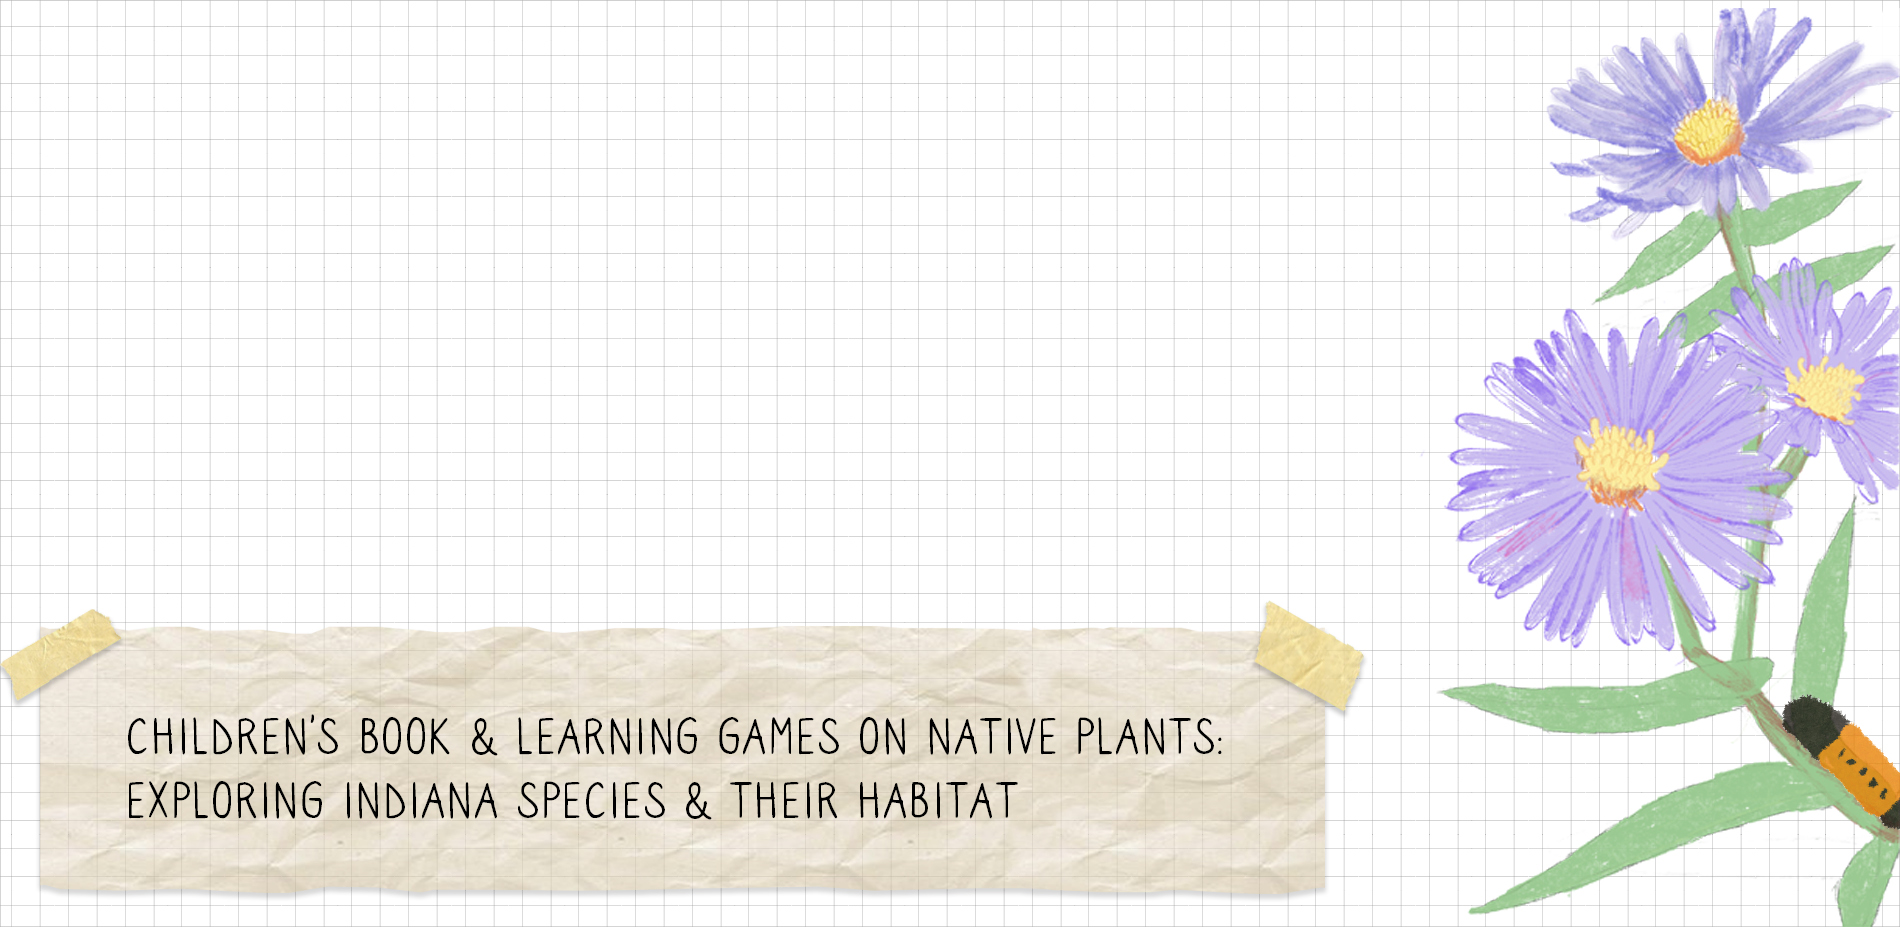 Children's Book & Learning Games on Native Plants